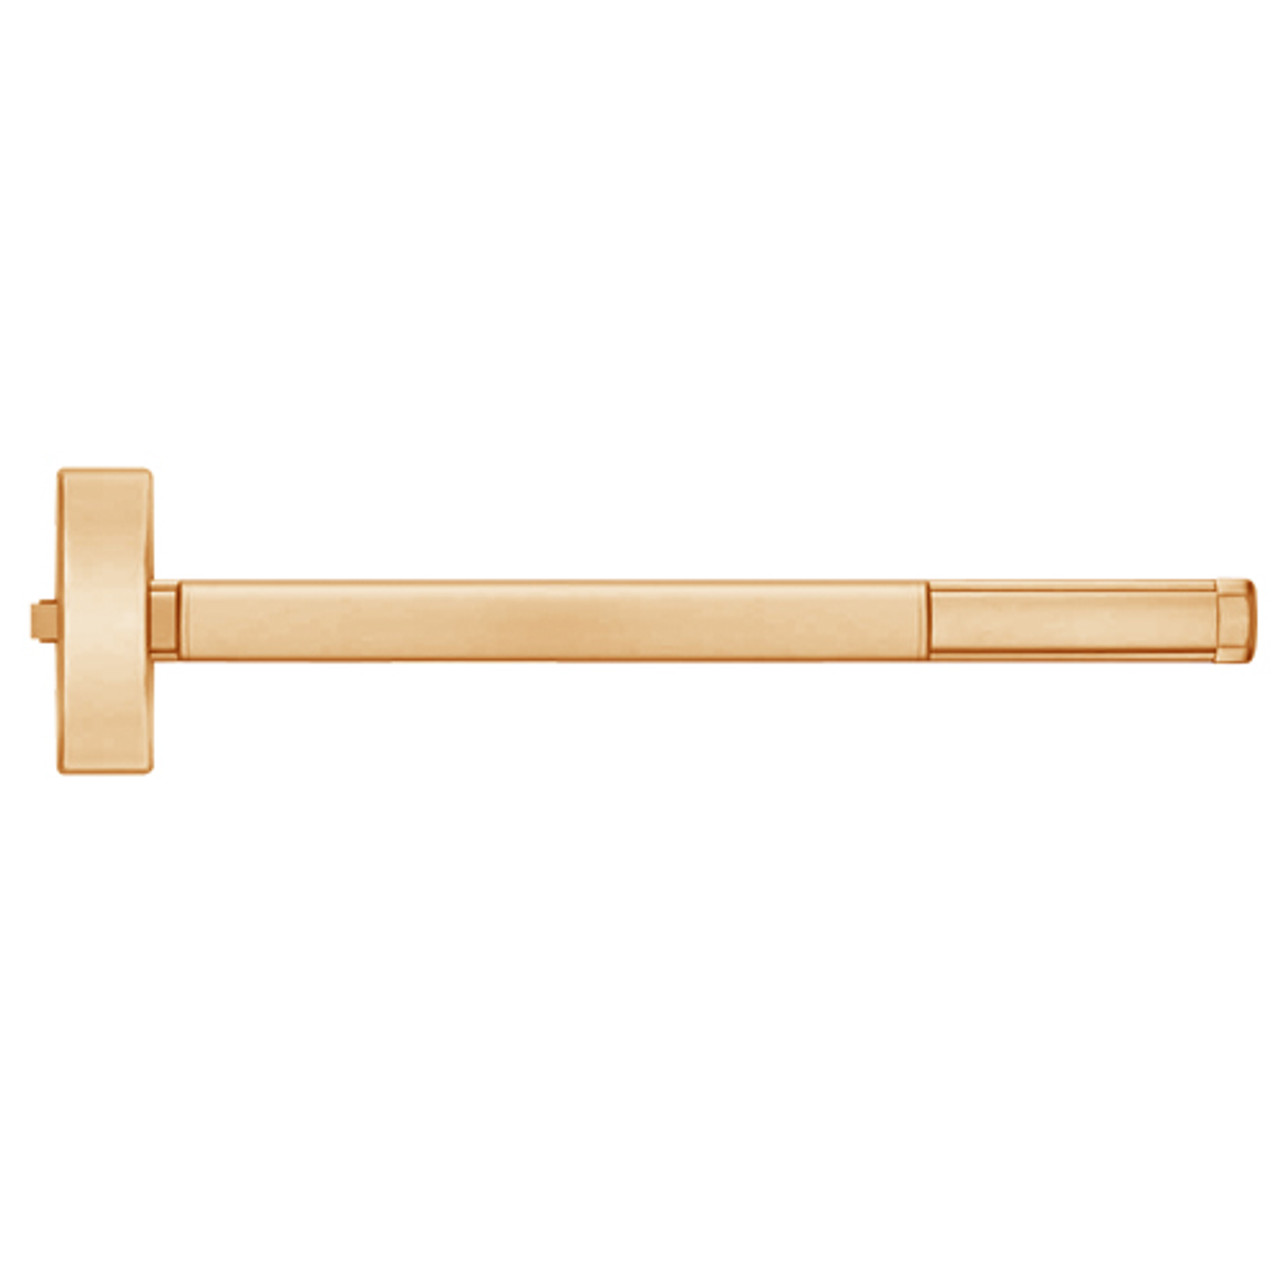 TSFL2105-612-48 PHI 2100 Series Fire Rated Apex Rim Exit Device with Touchbar Monitoring Switch Prepped for Key Controls Thumb Piece in Satin Bronze Finish